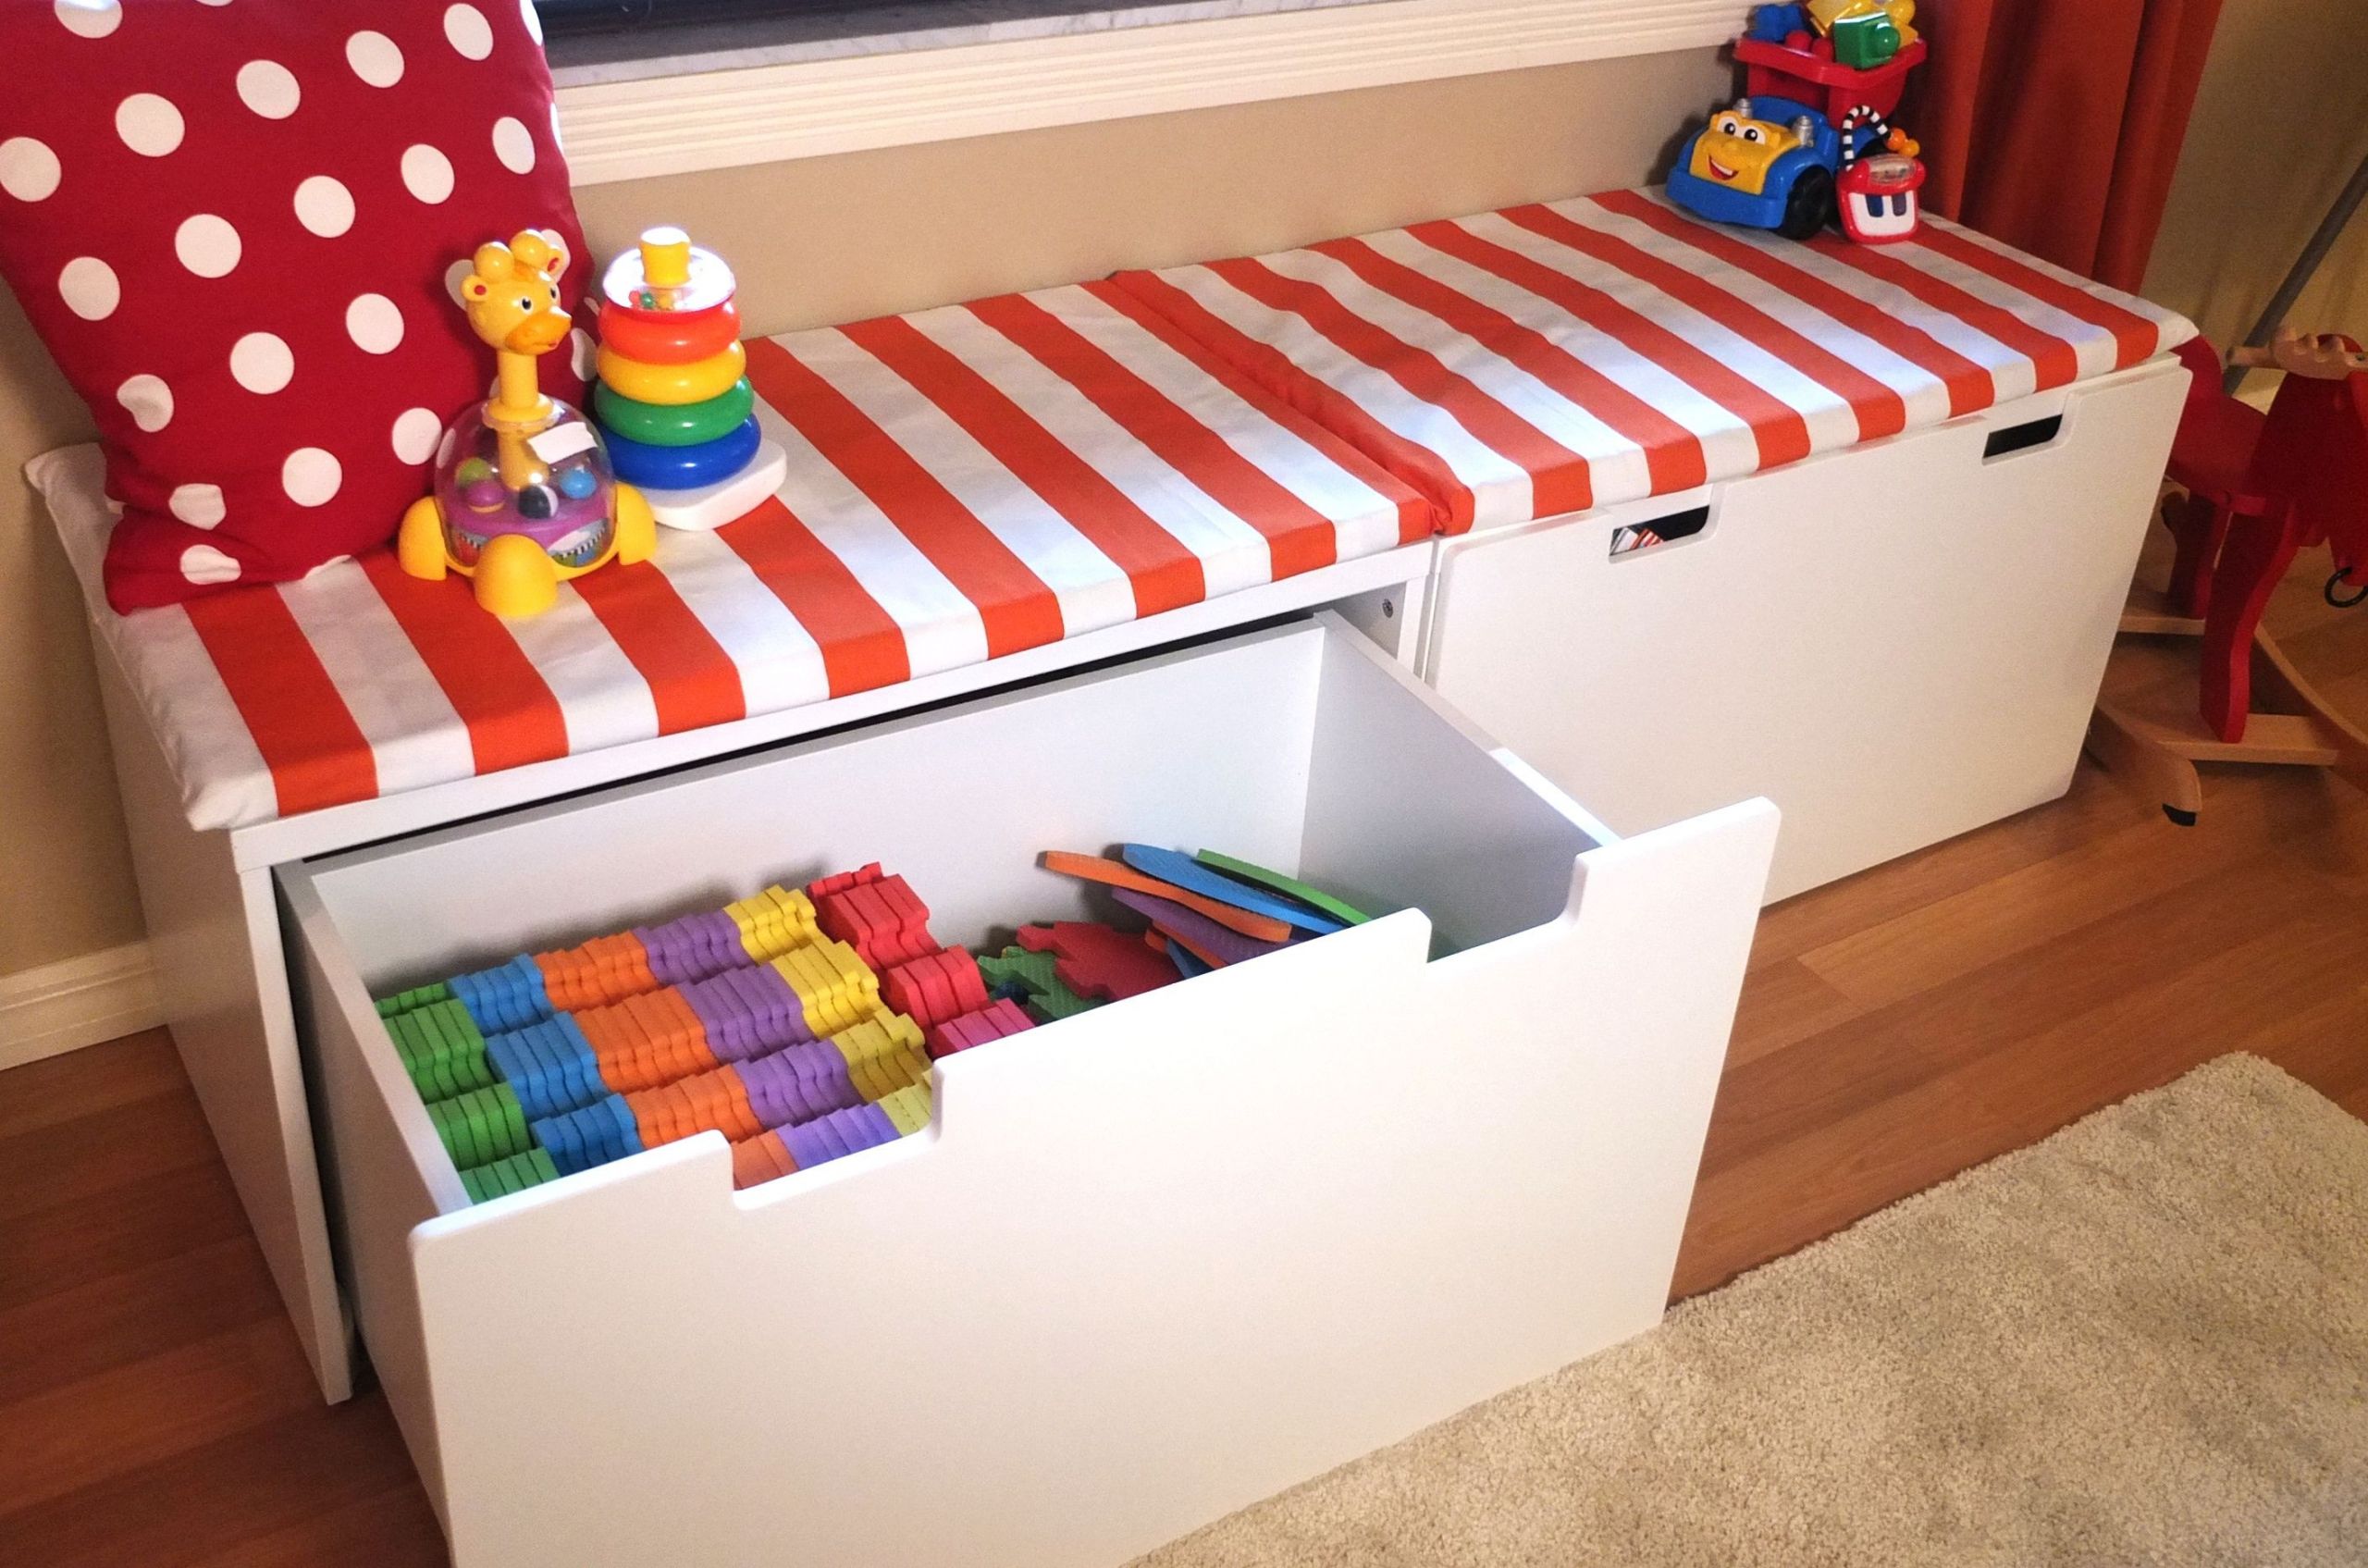 Kids Toy Storage Bench
 US Furniture and Home Furnishings in 2019